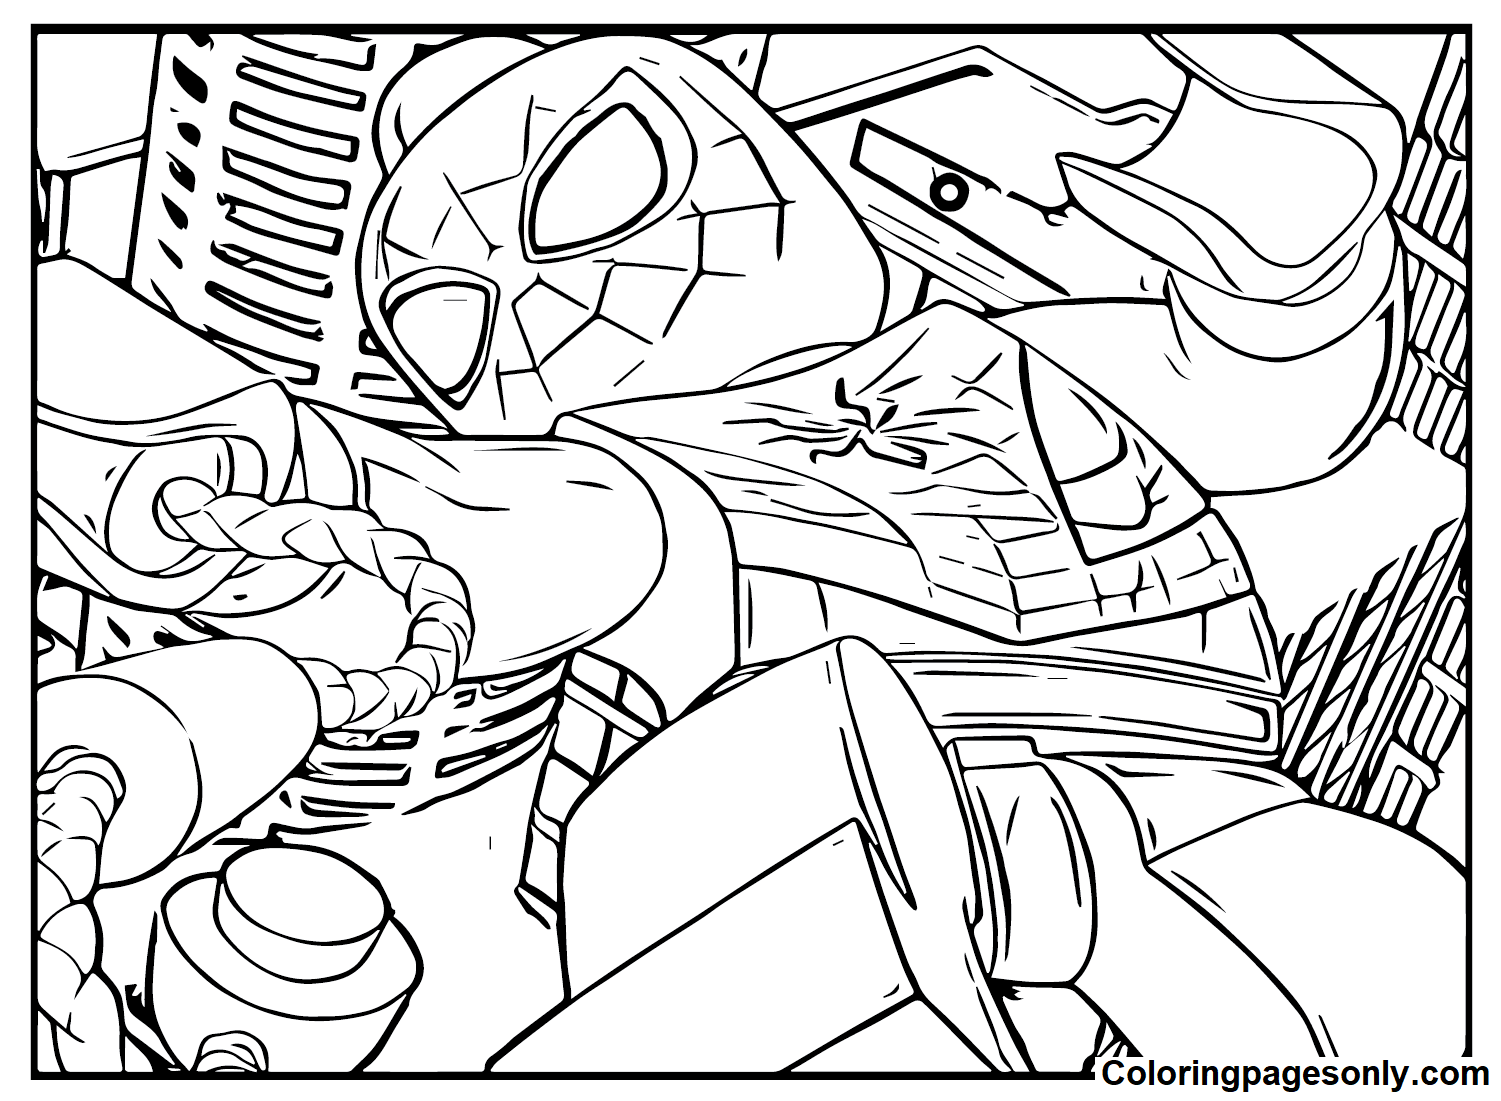 Amazing Spiderman Lego Coloring Page